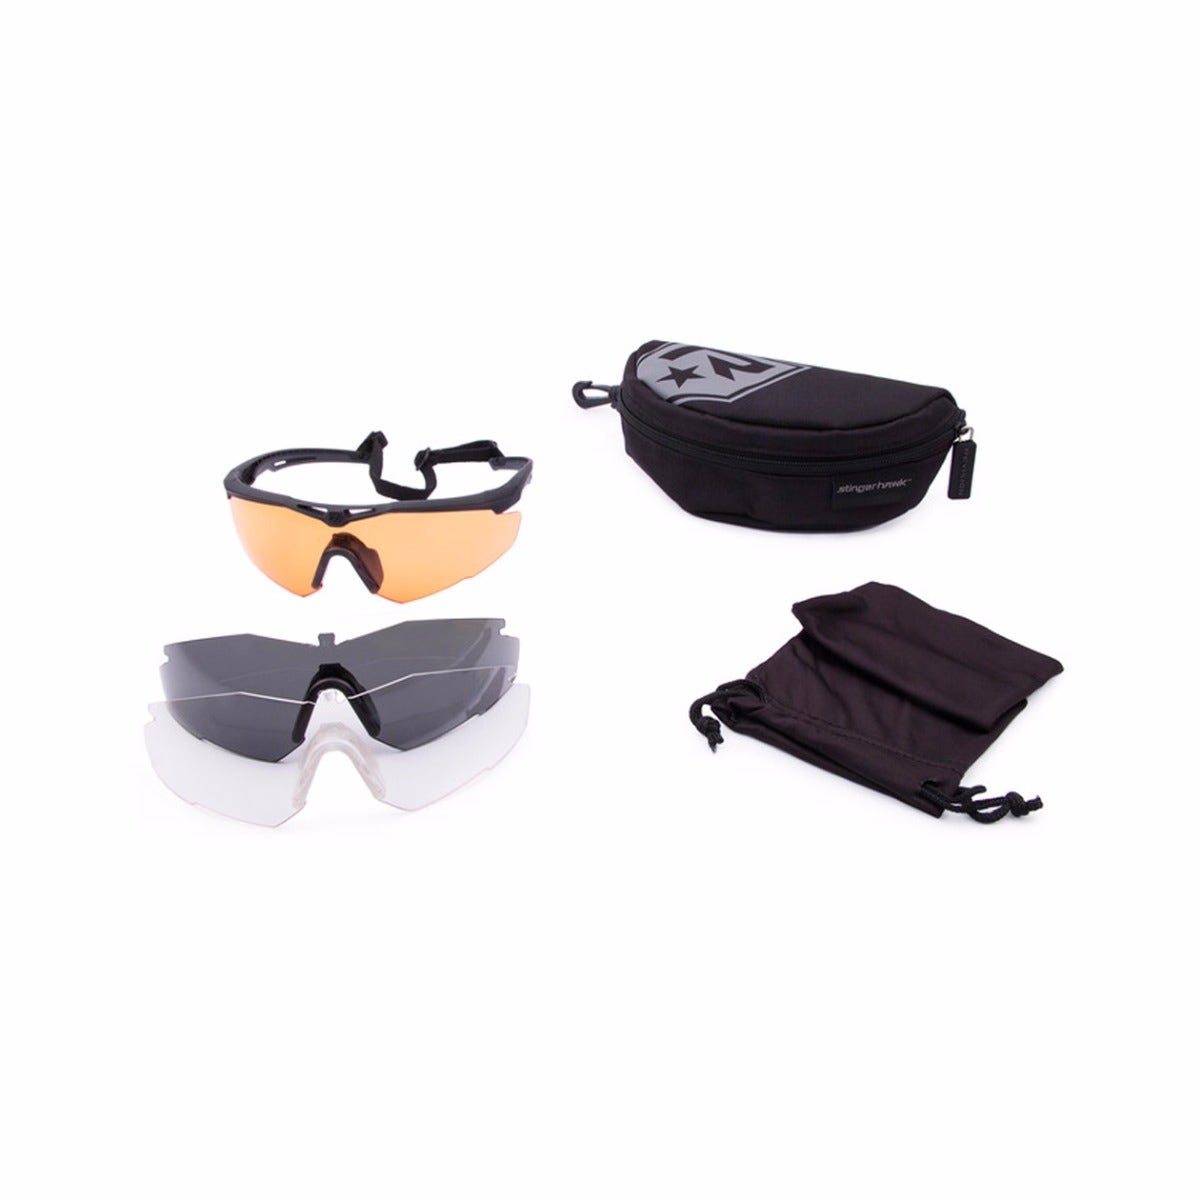 REVISION spectacles deluxe kit black